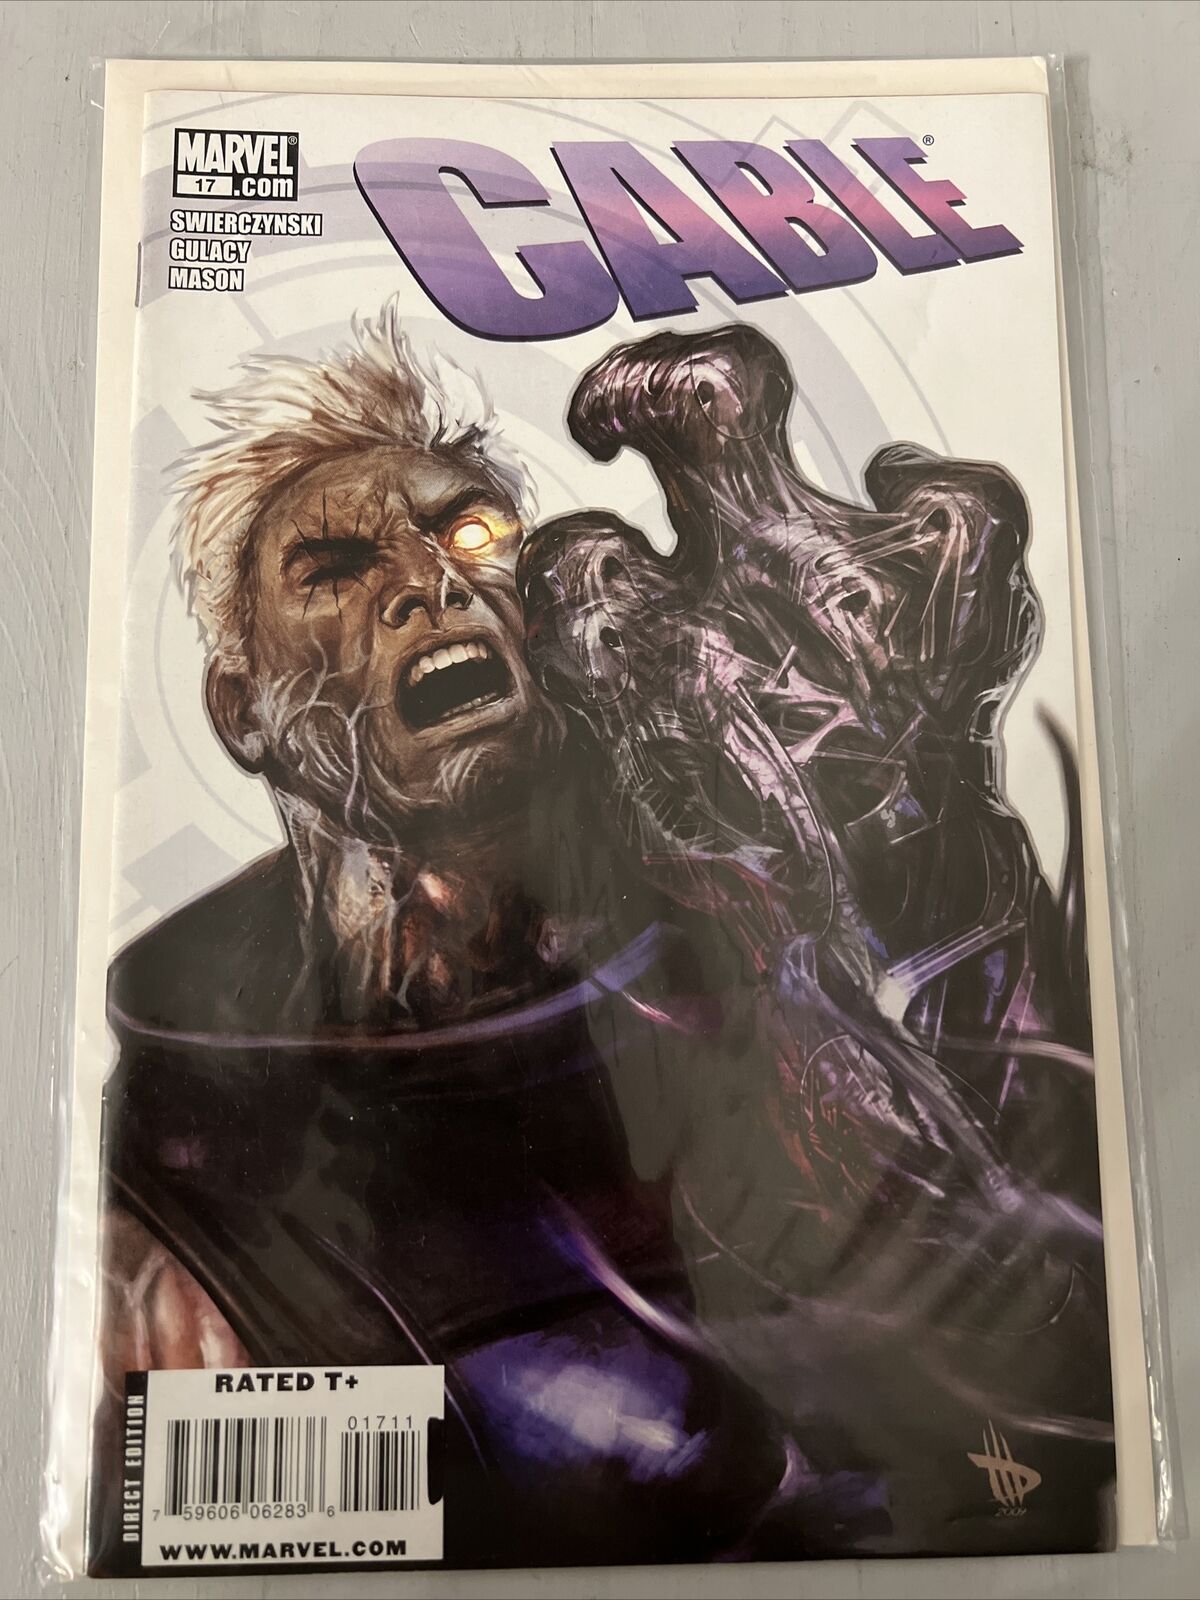 MARVEL CABLE ISSUE #17 COMIC BOOK (BRAND NEW)